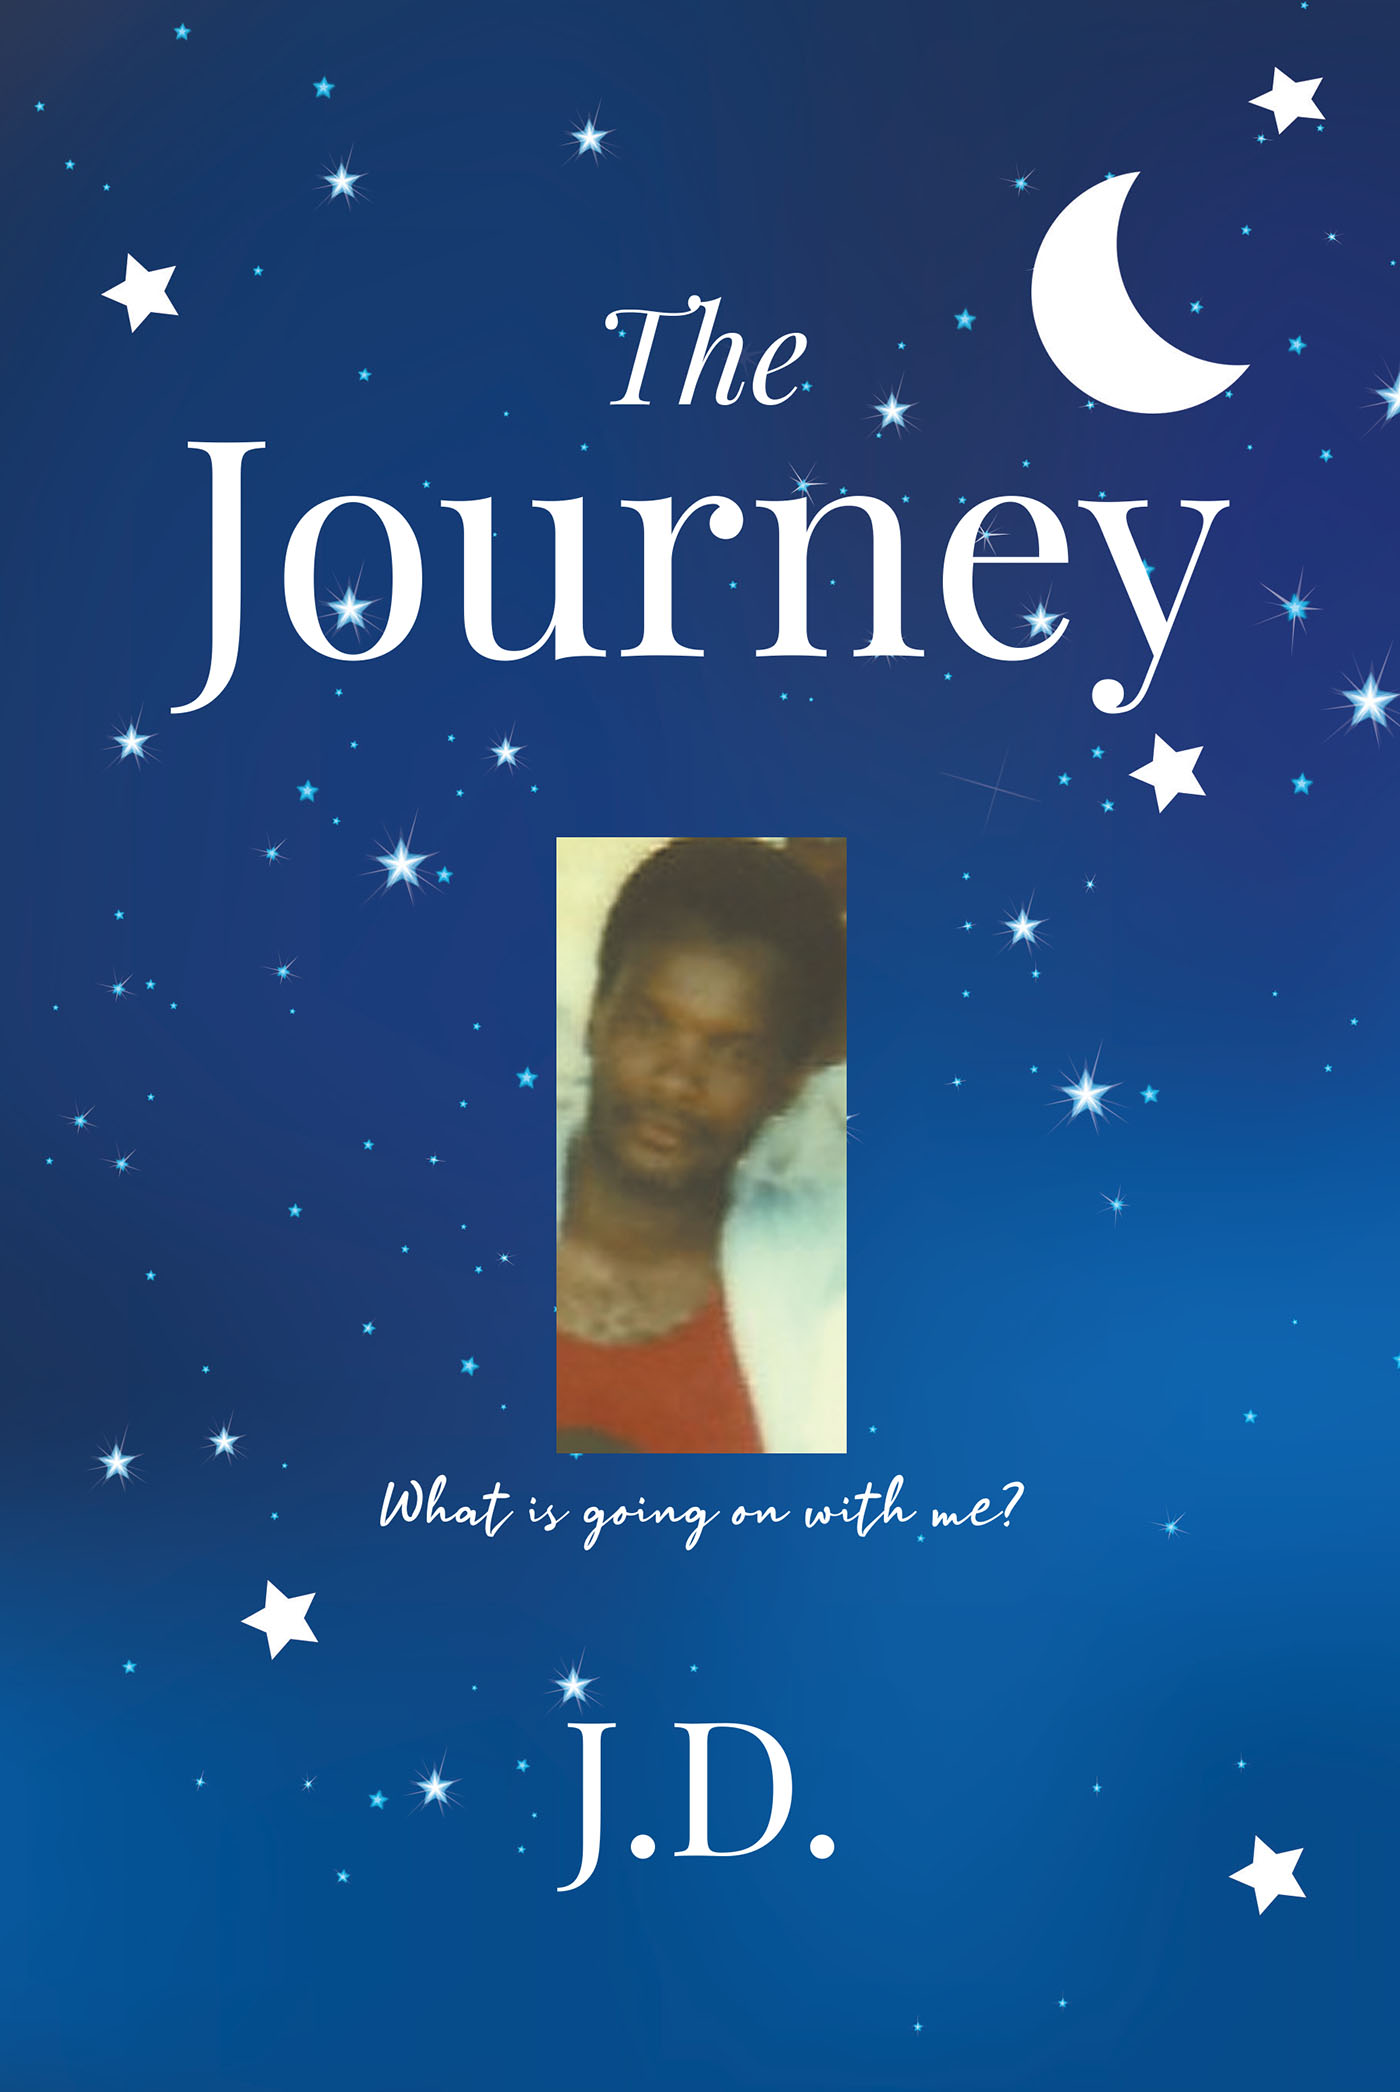 Author J.D.’s New Book, "The Journey," is the Compelling Story of the Author's Life and Wrongful Imprisonment and How His Faith Helped Him to Survive It All